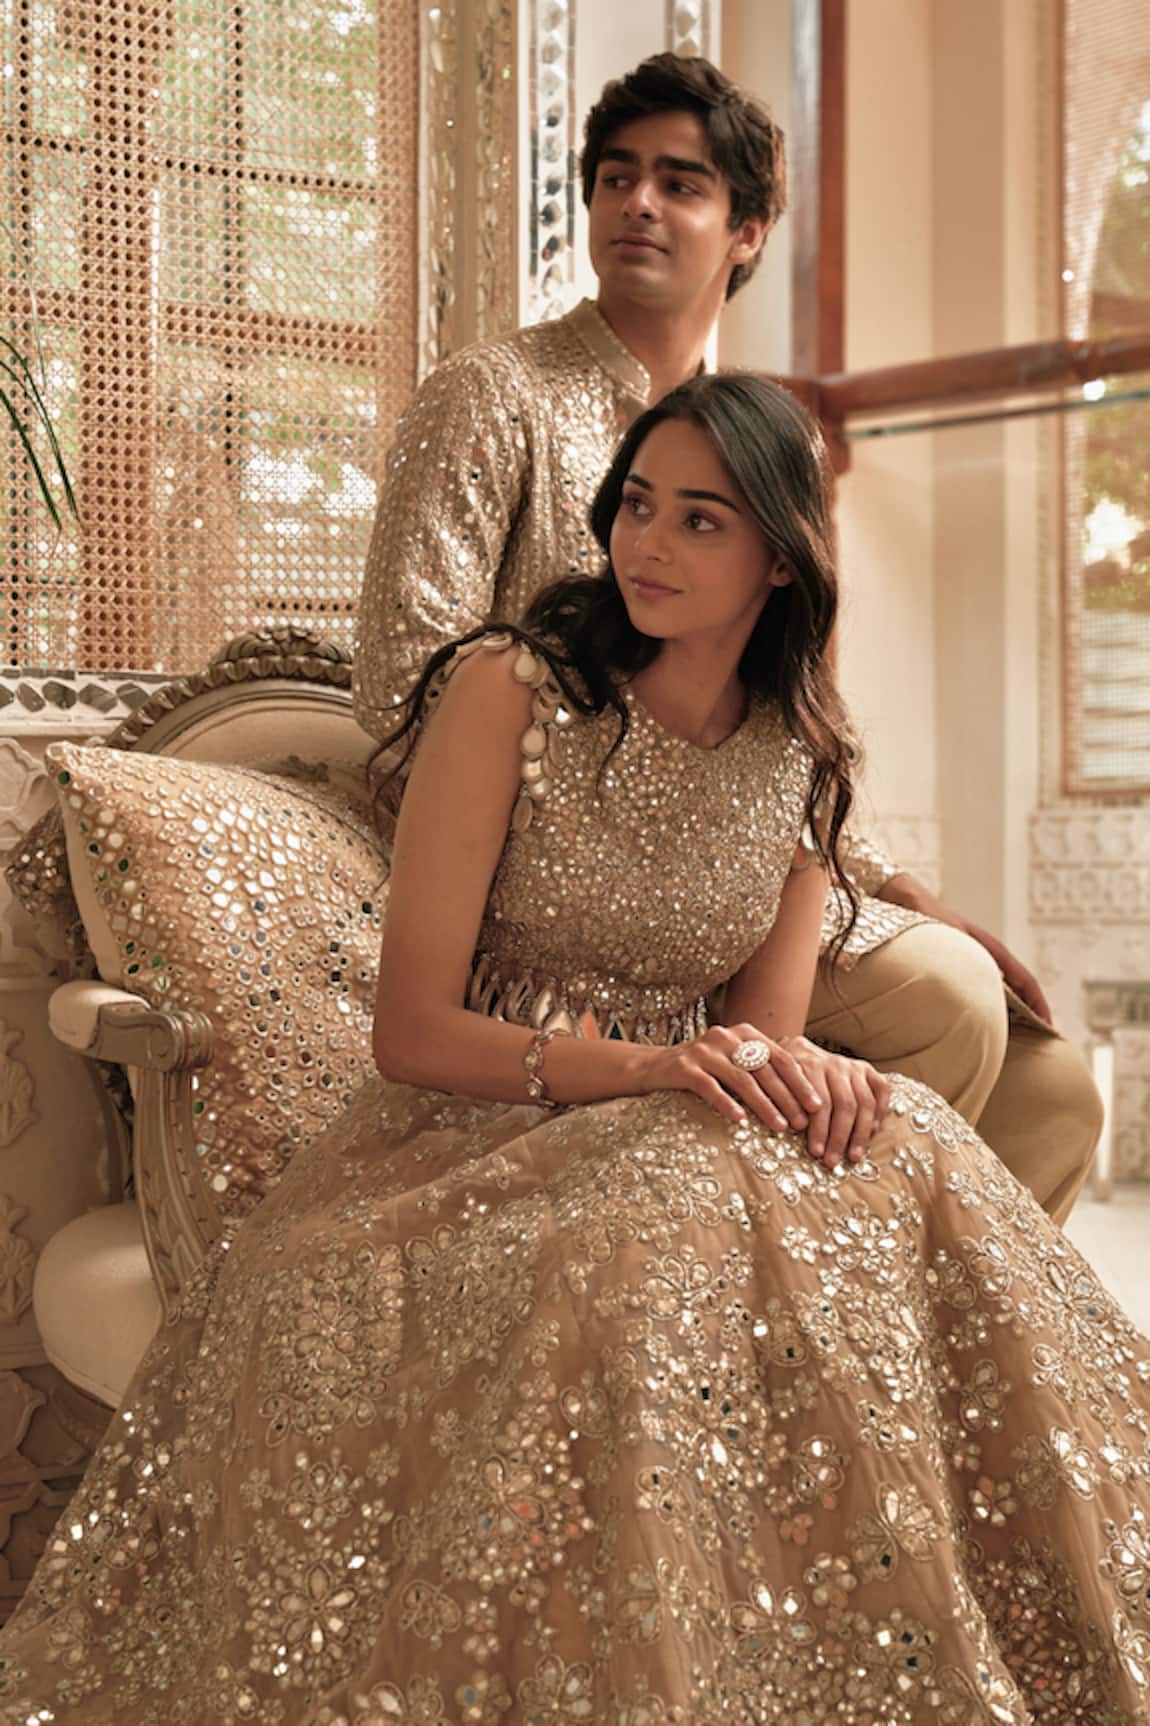 Glittery Sequin And Shimmer Lehengas Are Ruling 2022! – ShaadiWish